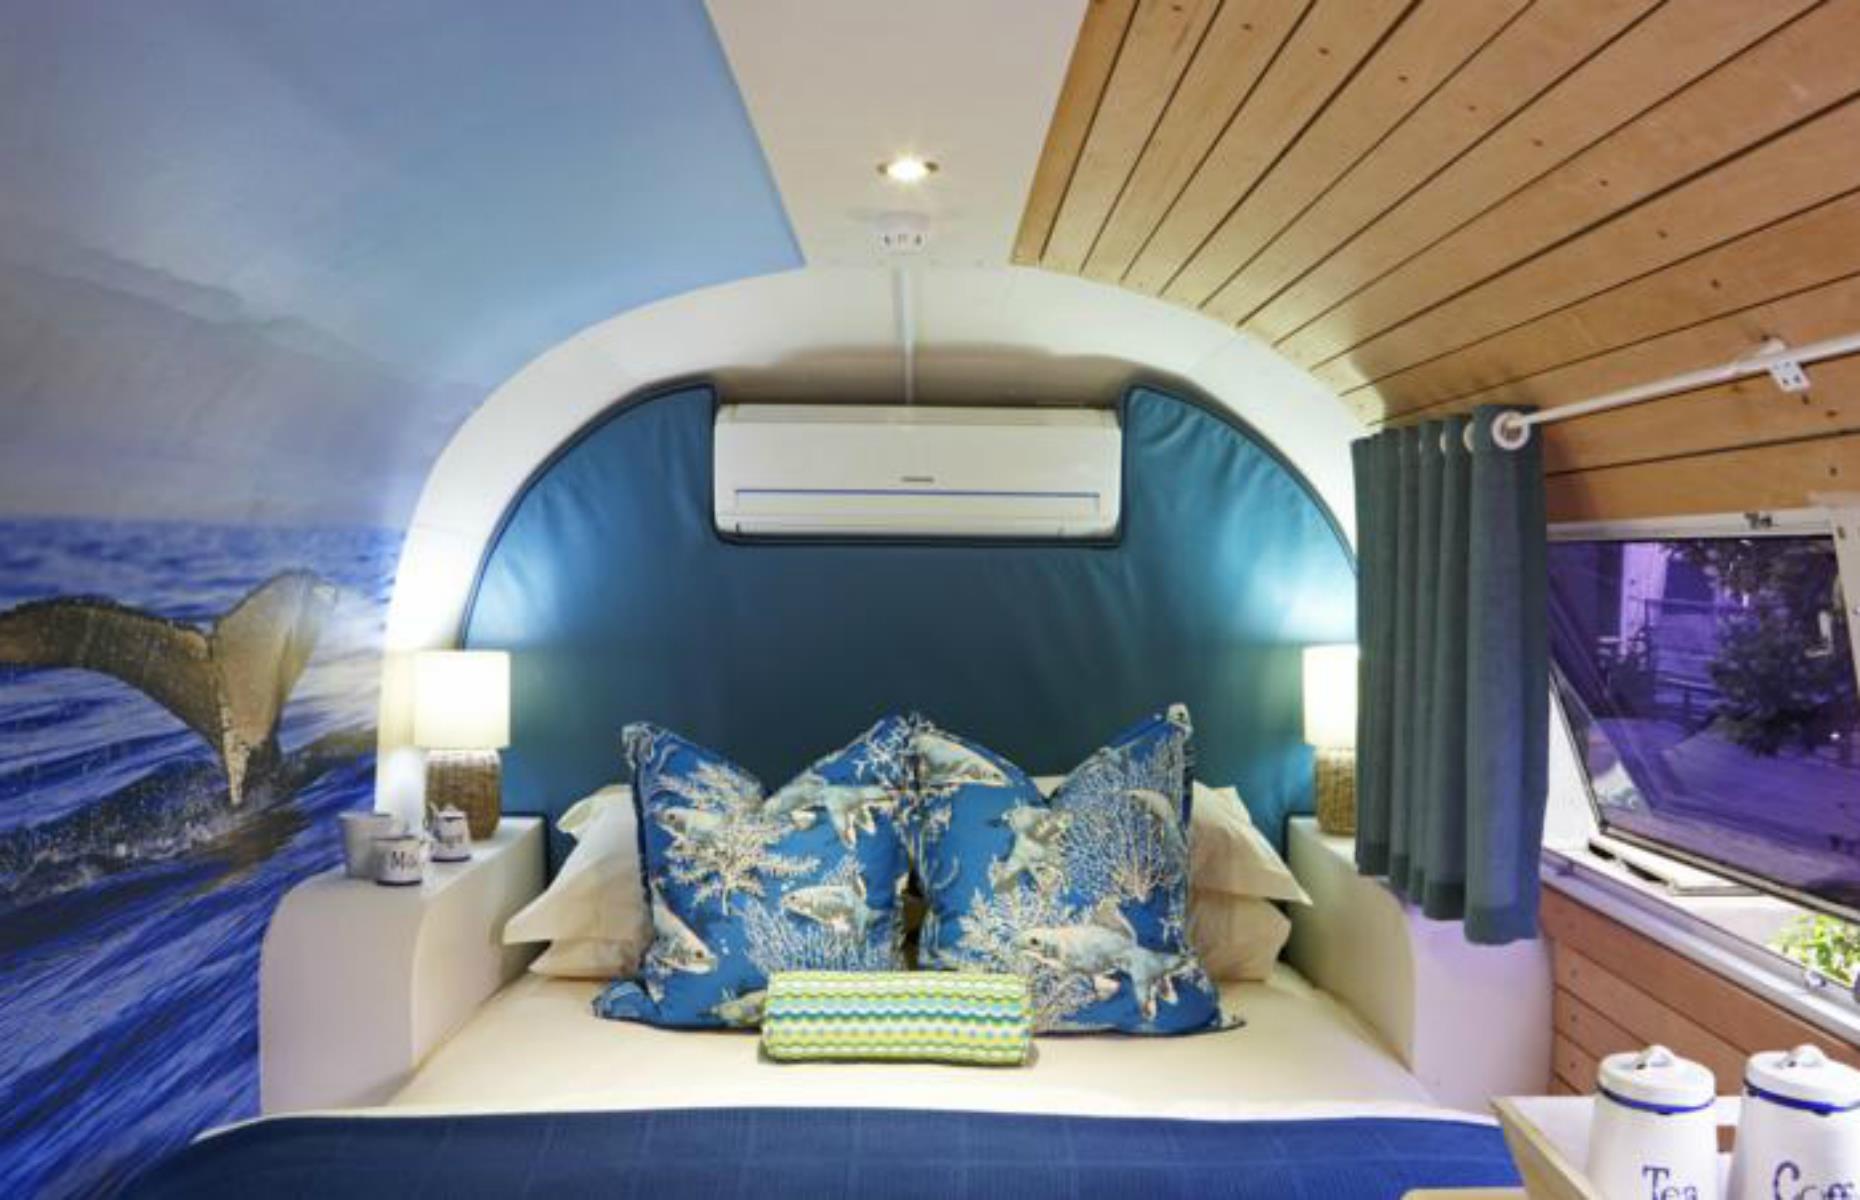 <p>On this chic hotel rooftop, there's a lot going on, from Airstream accommodation to an open-air cinema. There are seven individually-themed <a href="https://hostunusual.com/property/grand-daddy-airstream-trailer-park/">Airstreams</a> in total, all designed by Cape Town-based designer Tracy Lynch. Did we mention the Airstreams have incredible views of Table Mountain too?</p>